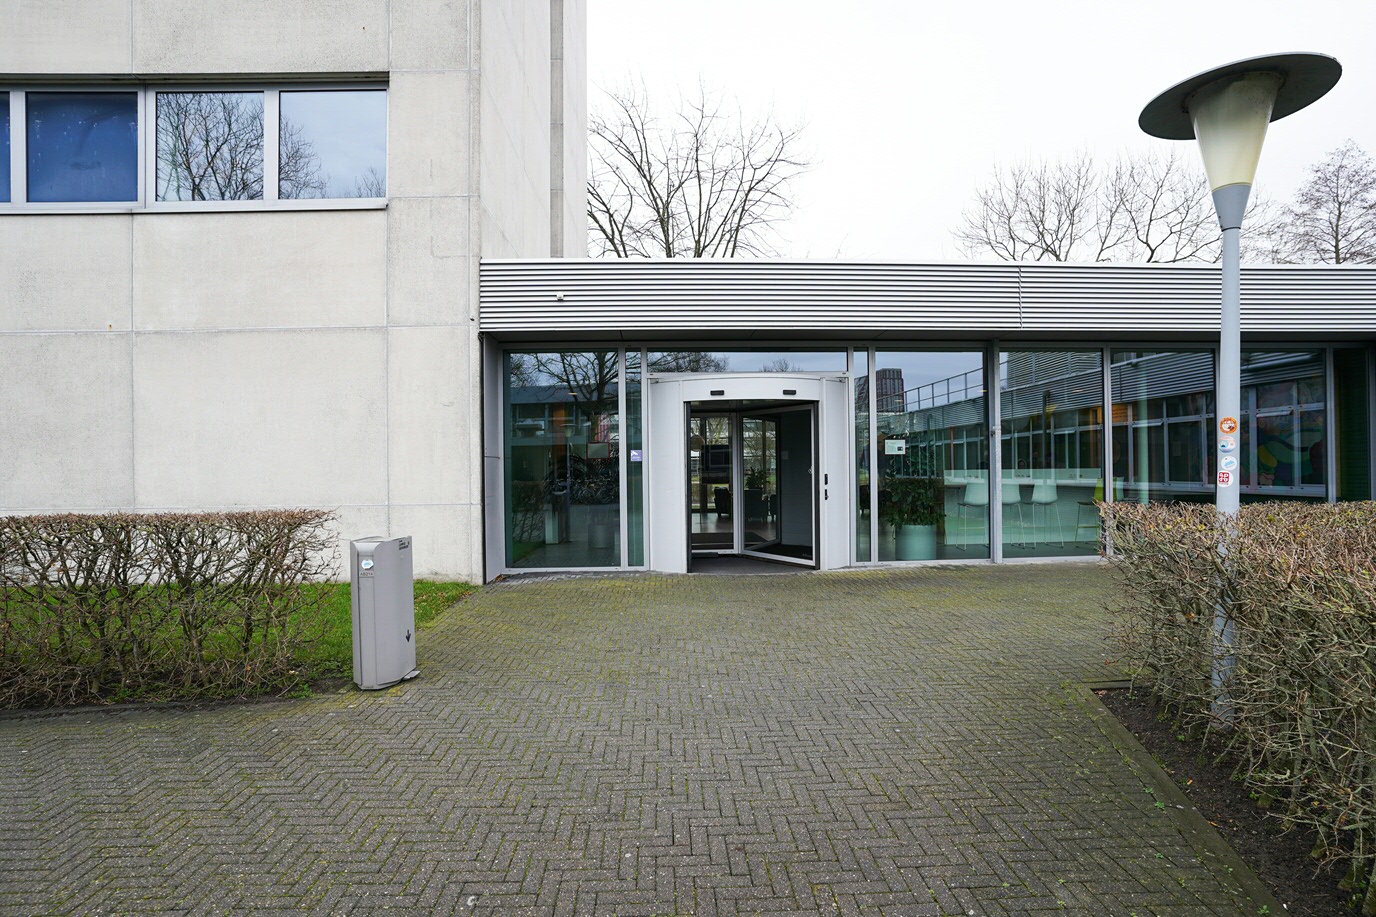 Entrance at the back of the building, automatic revolving door